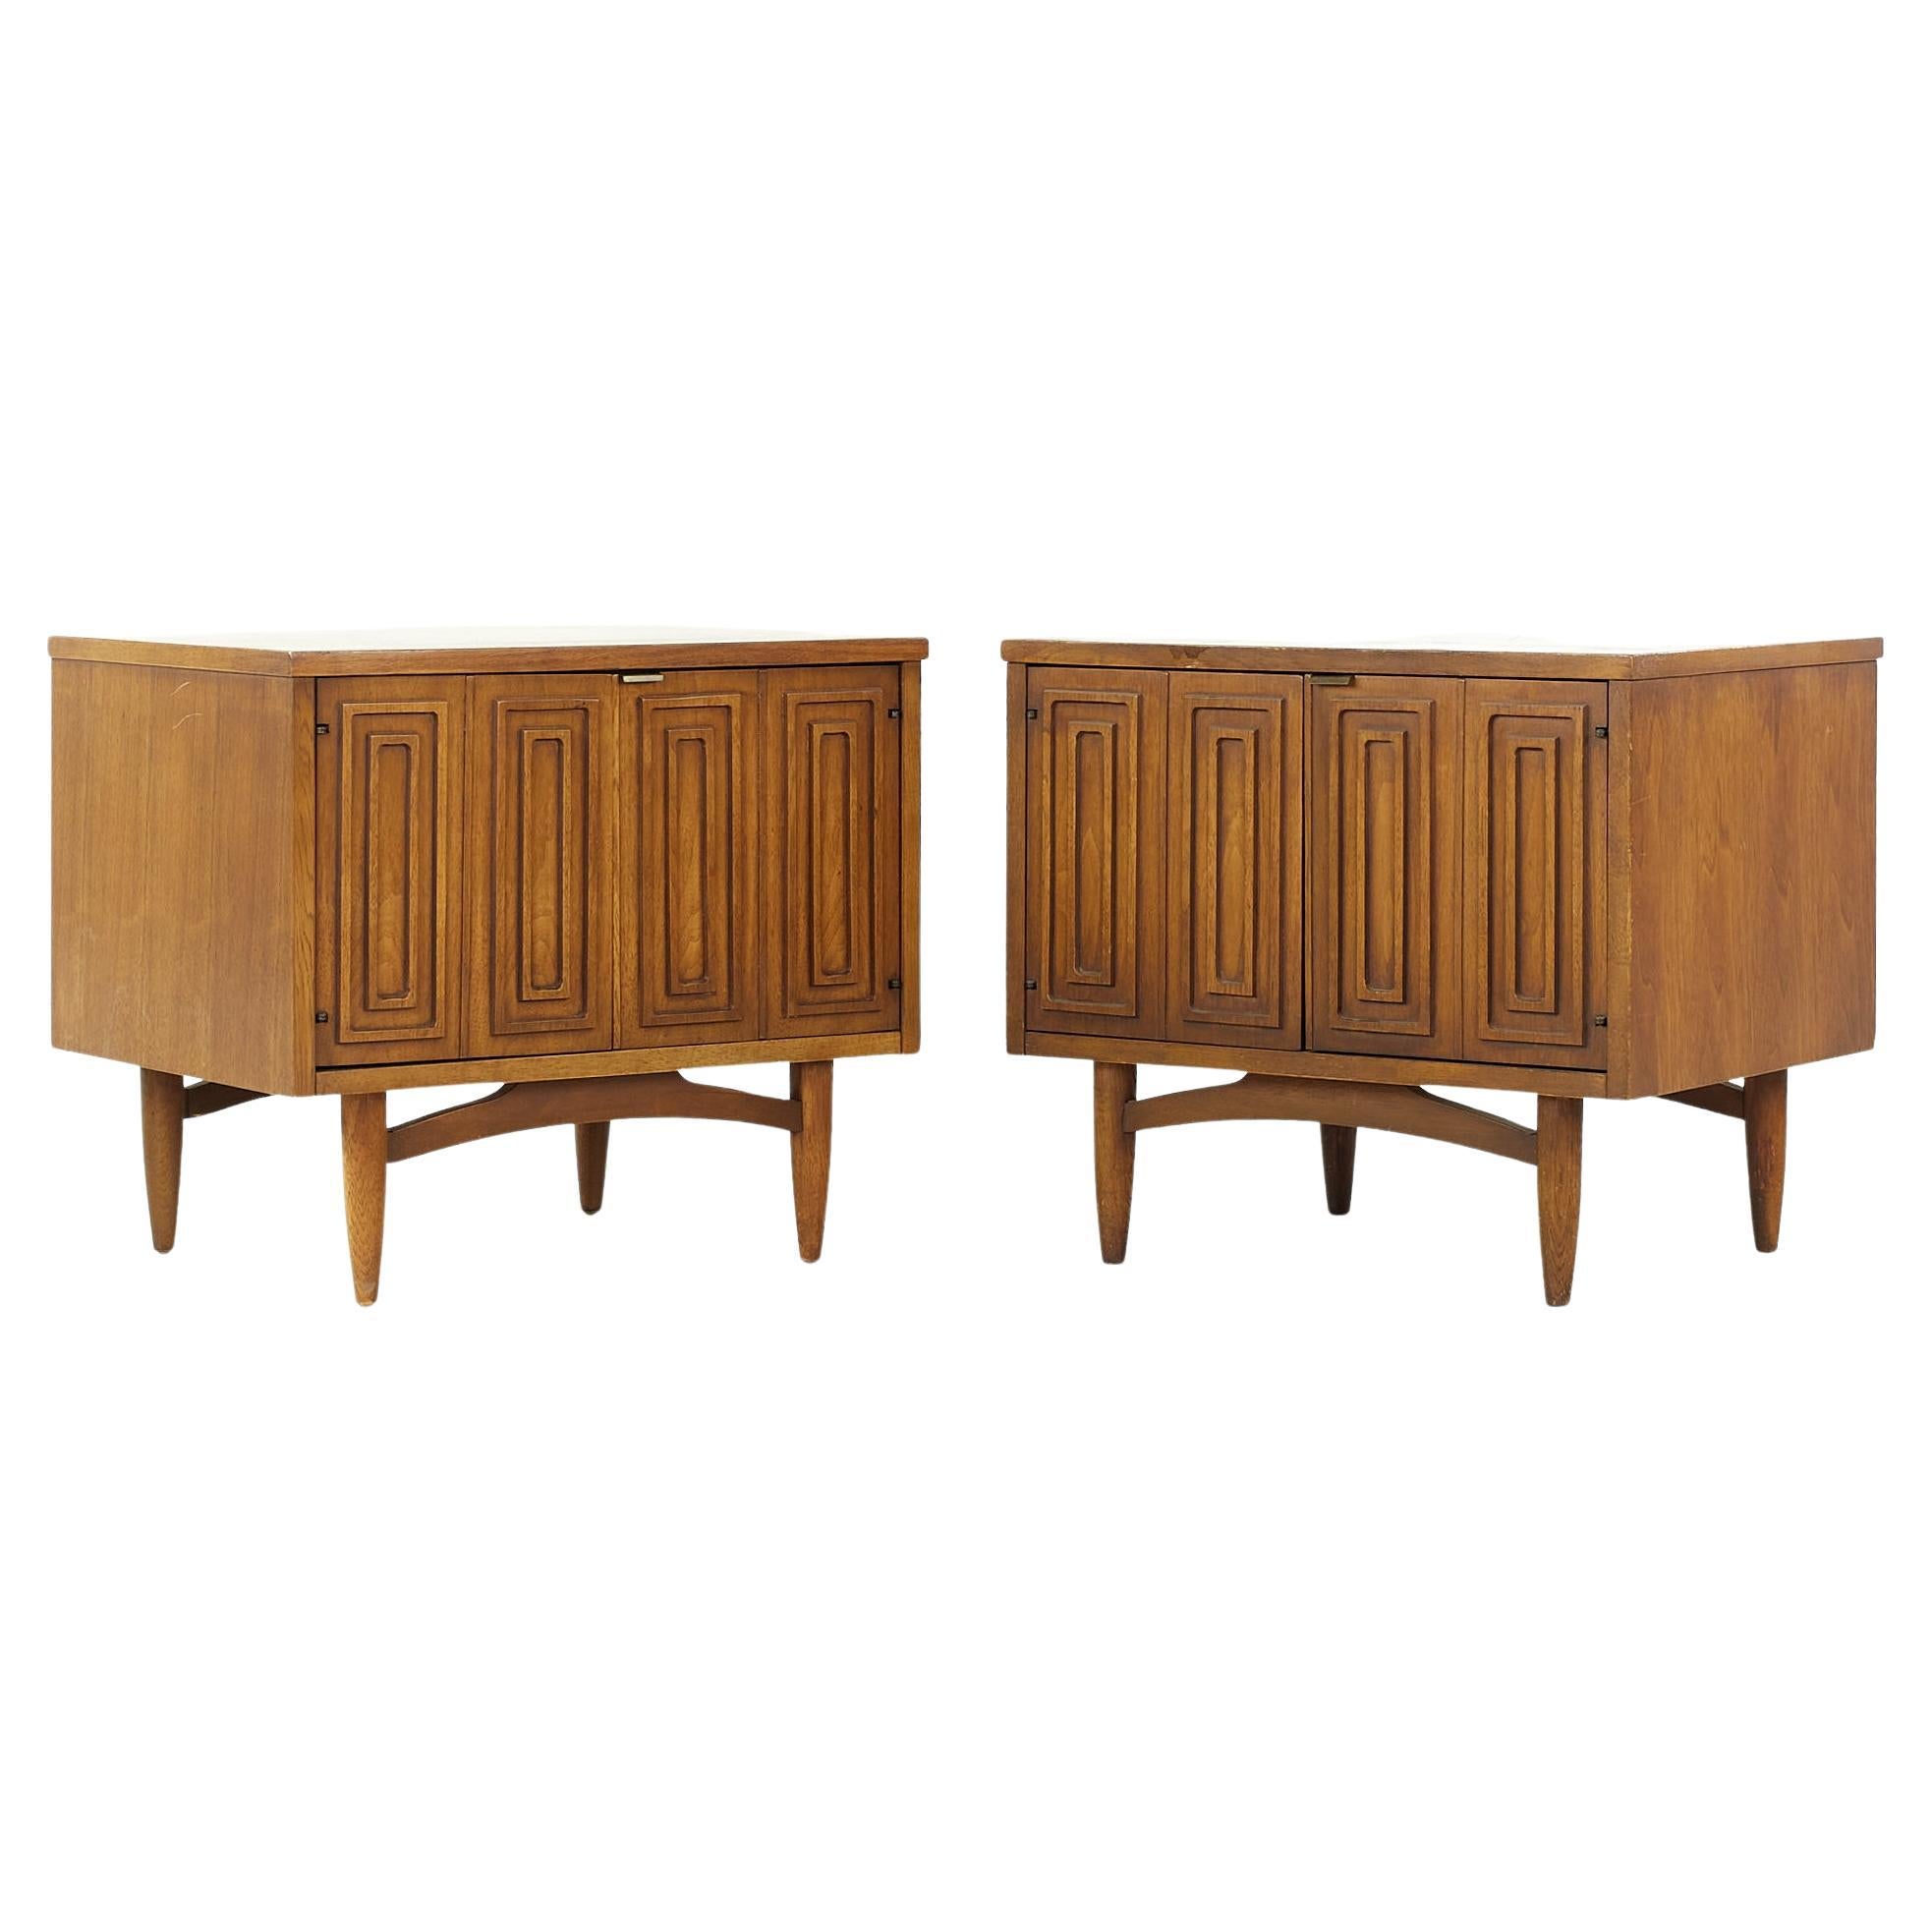 Sold 3.21.24 Broyhill Sculptra Midcentury Commode Nightstands, Pair